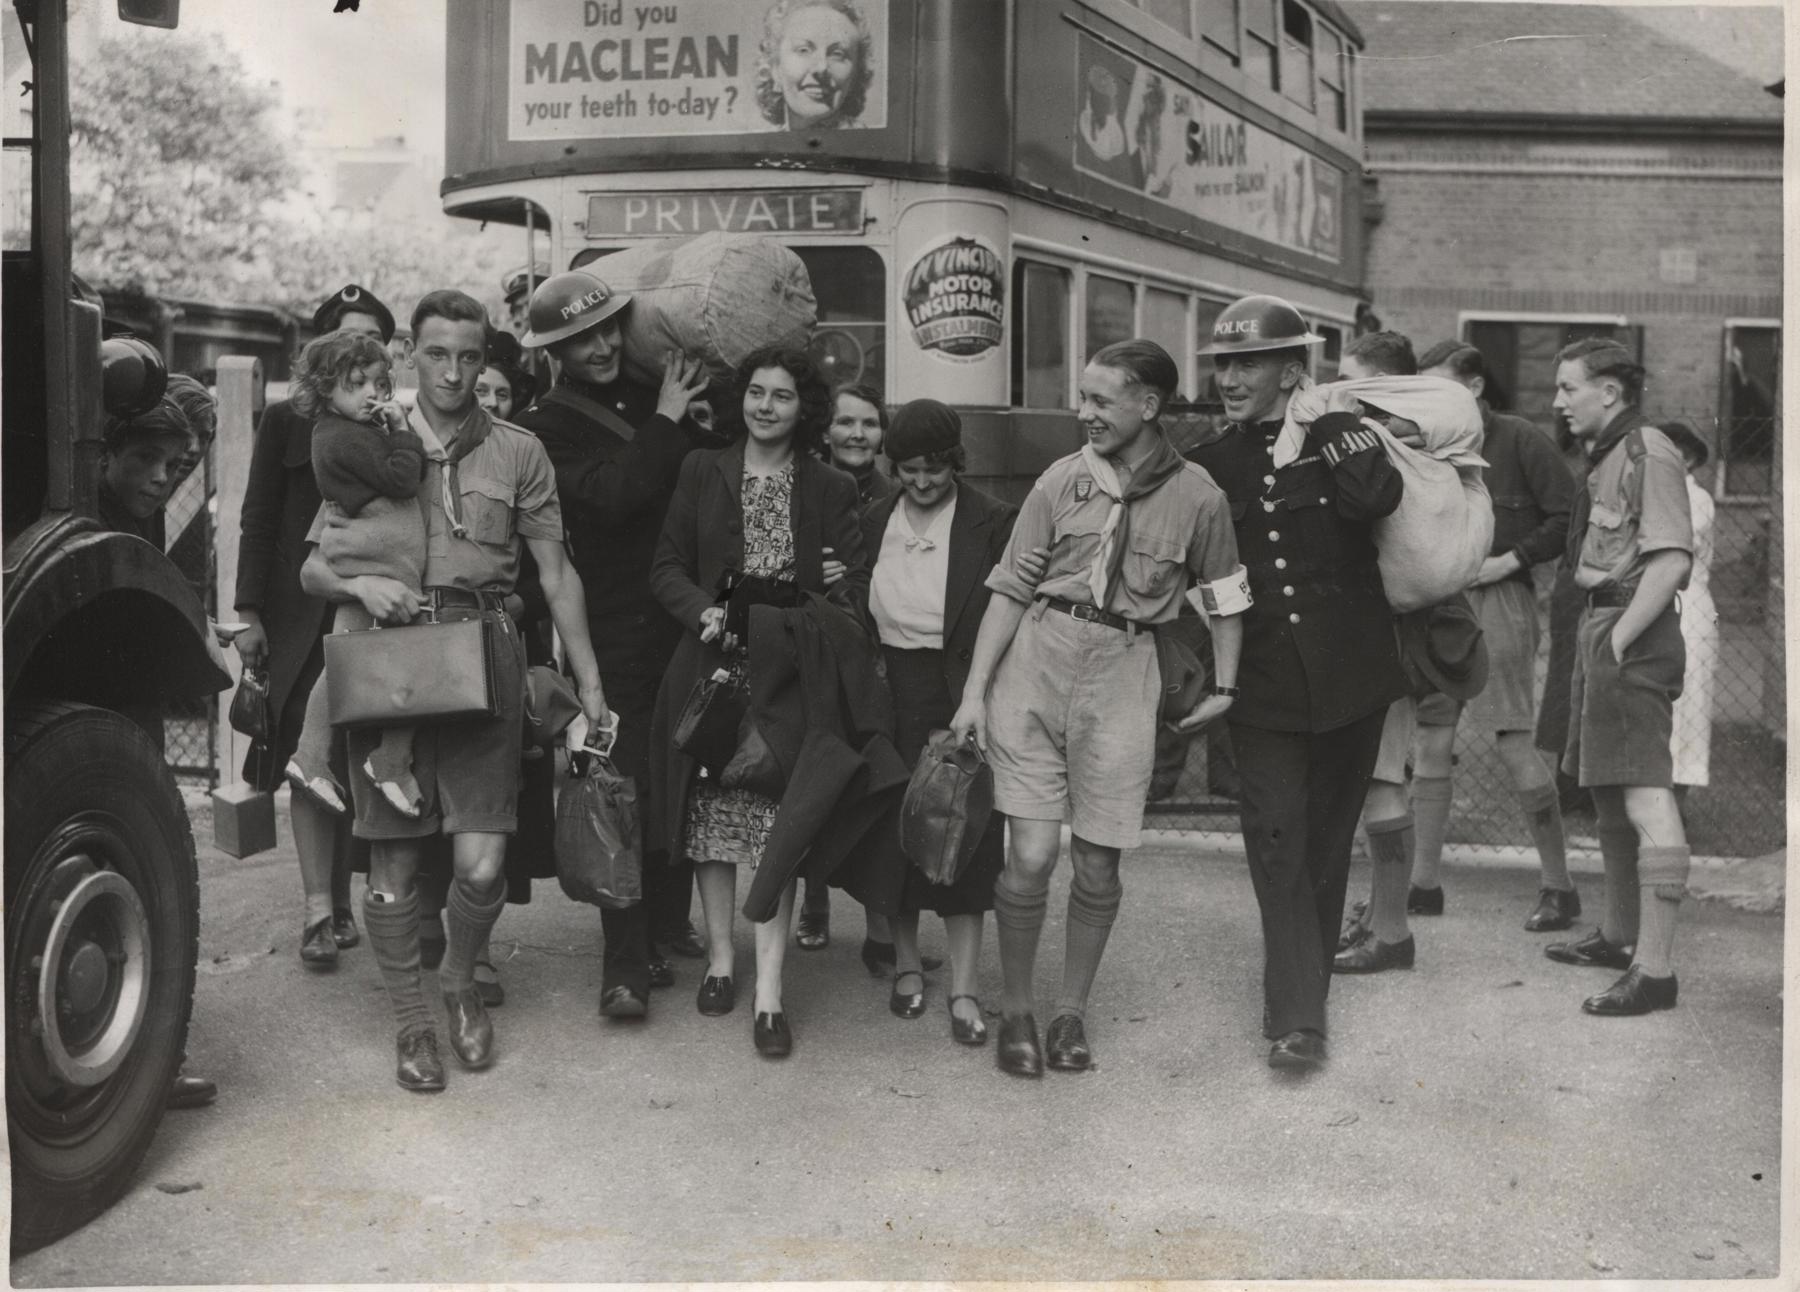 Scouts help to carry the luggage of Second World War evacuees in front of a bus. The Scouts are in uniform and they are walking towards the camera with children and women. One is carrying a suitcase and another is carrying a young girl.